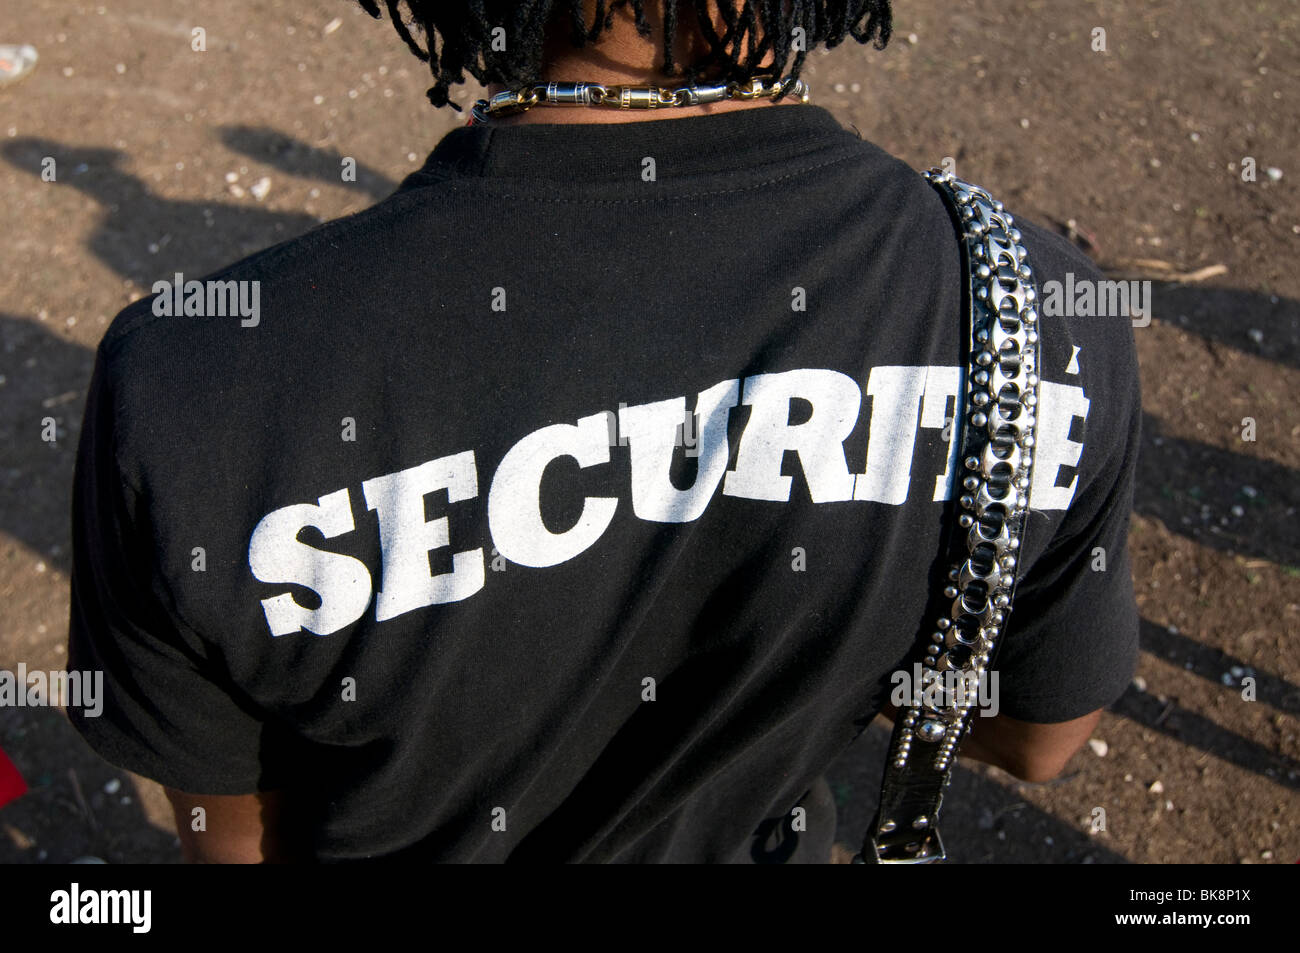 A local resident wearing a T shirt  which the word Security is written on it in Port au Prince Haiti Stock Photo